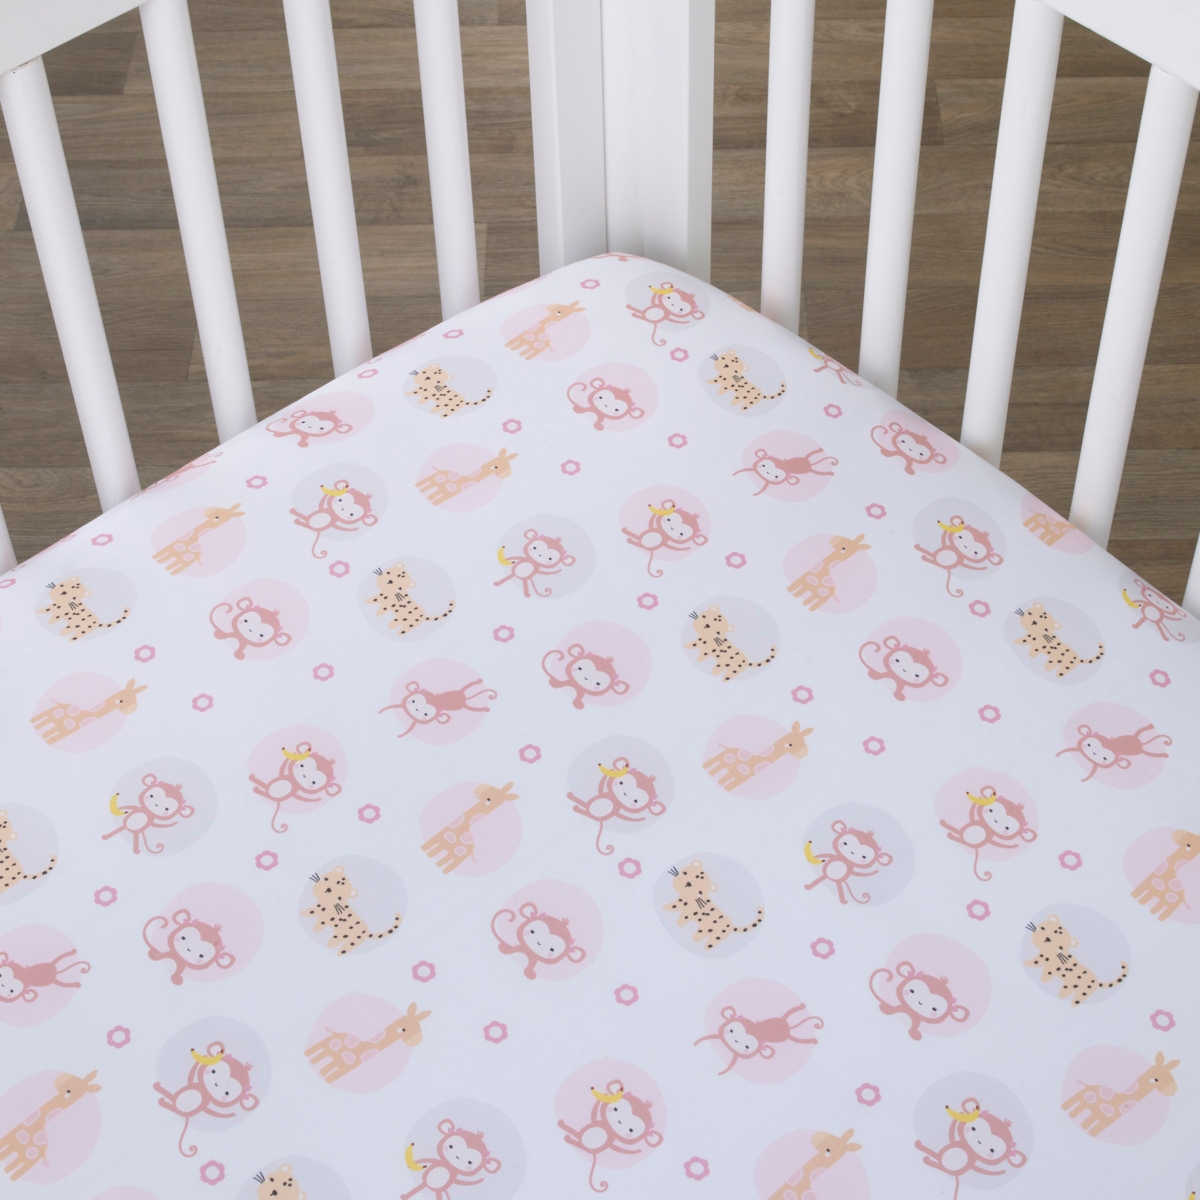 Nojo Sweet Jungle Friends, Monkey, Cheetah And Giraffe Super Soft Fitted Crib Sheet Bedding In Pink